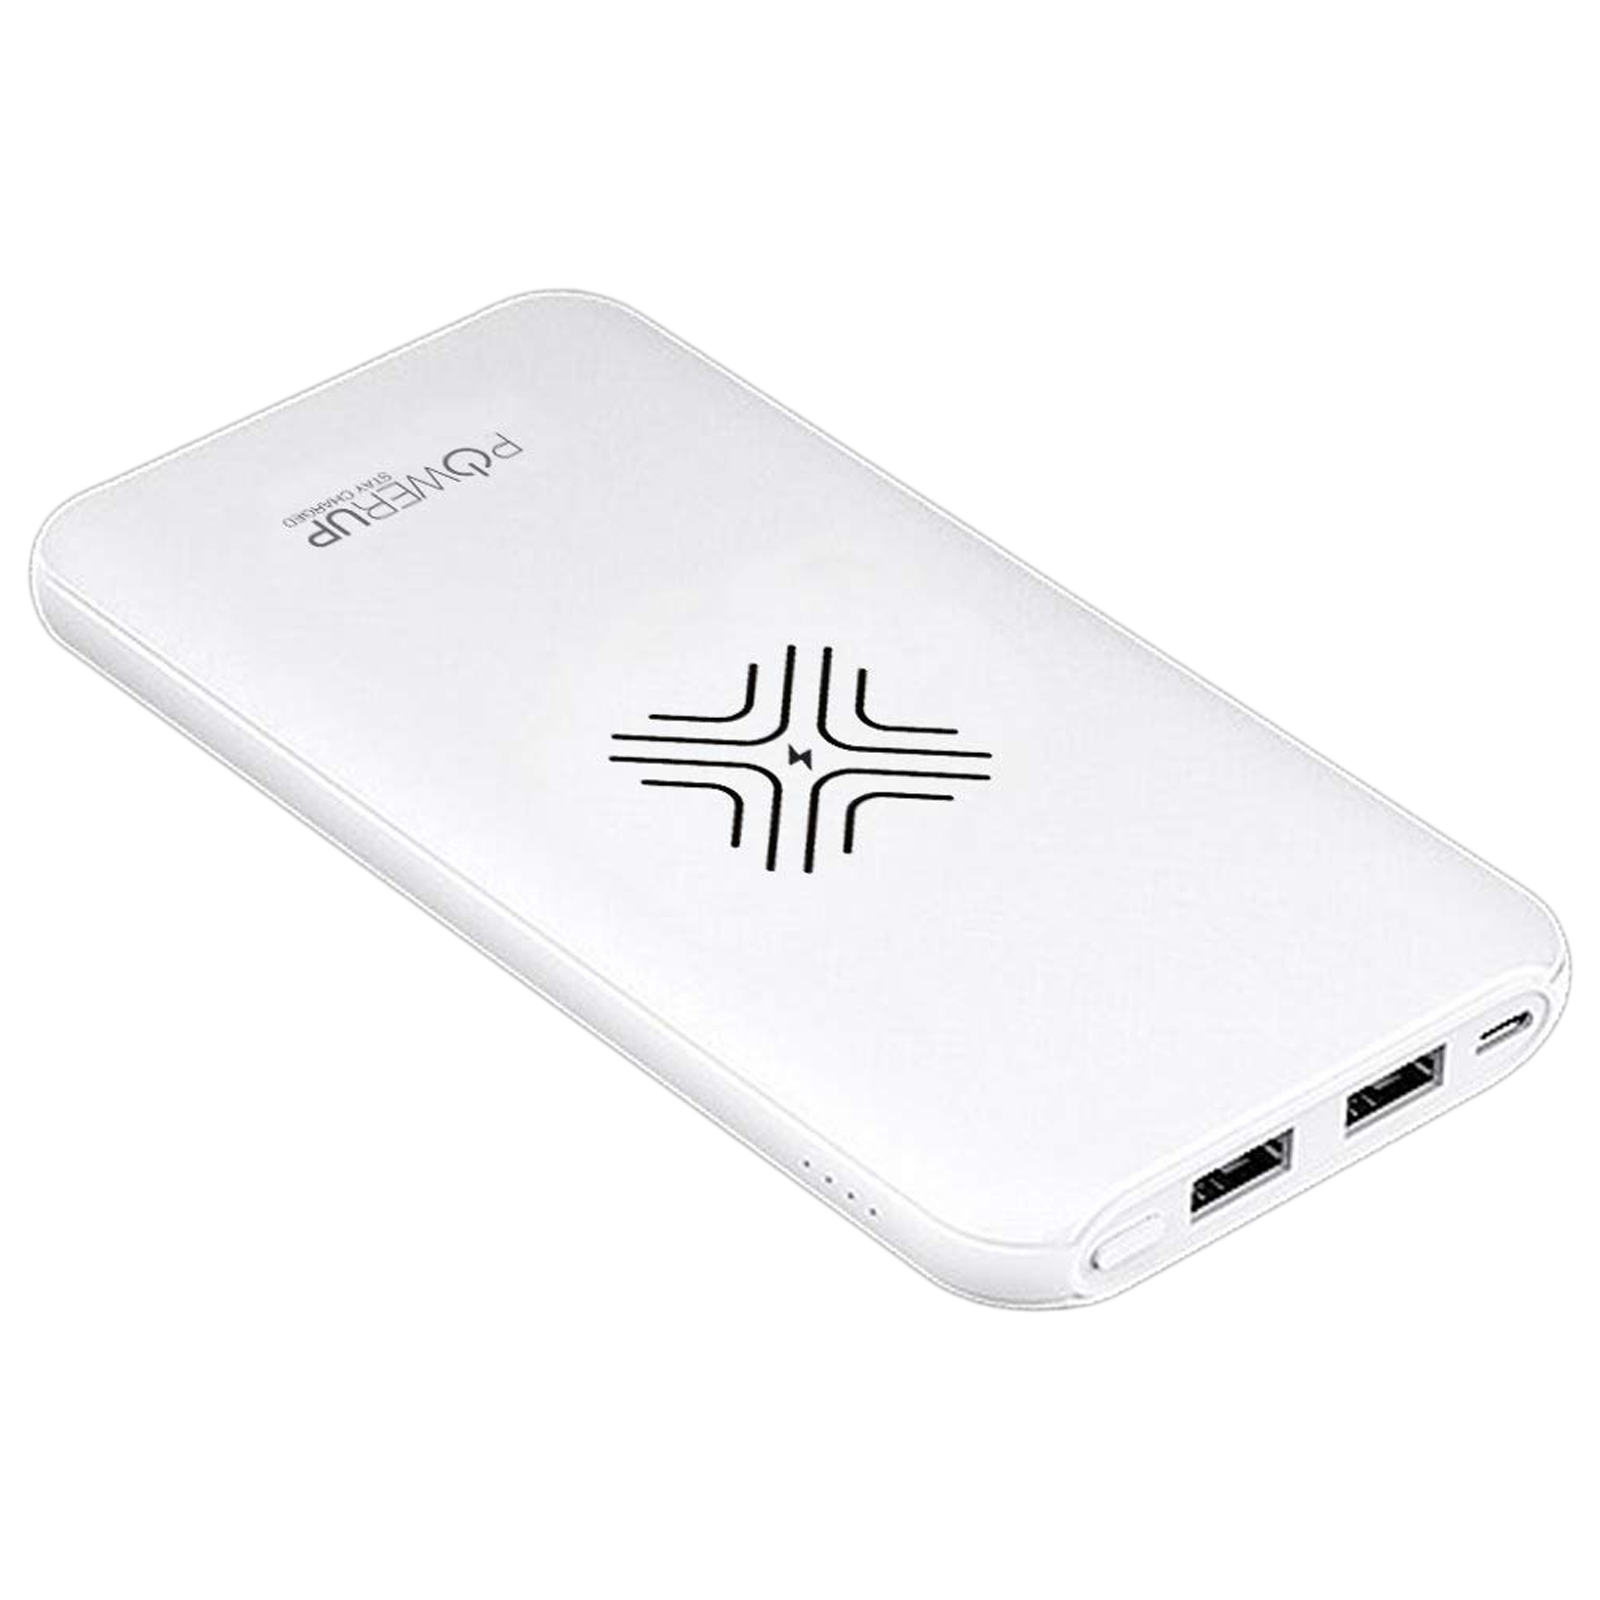 Powerup 10000mAh 2-Port Power Bank (Wireless Charging Support, PUP-PMWPB10K, White)_1